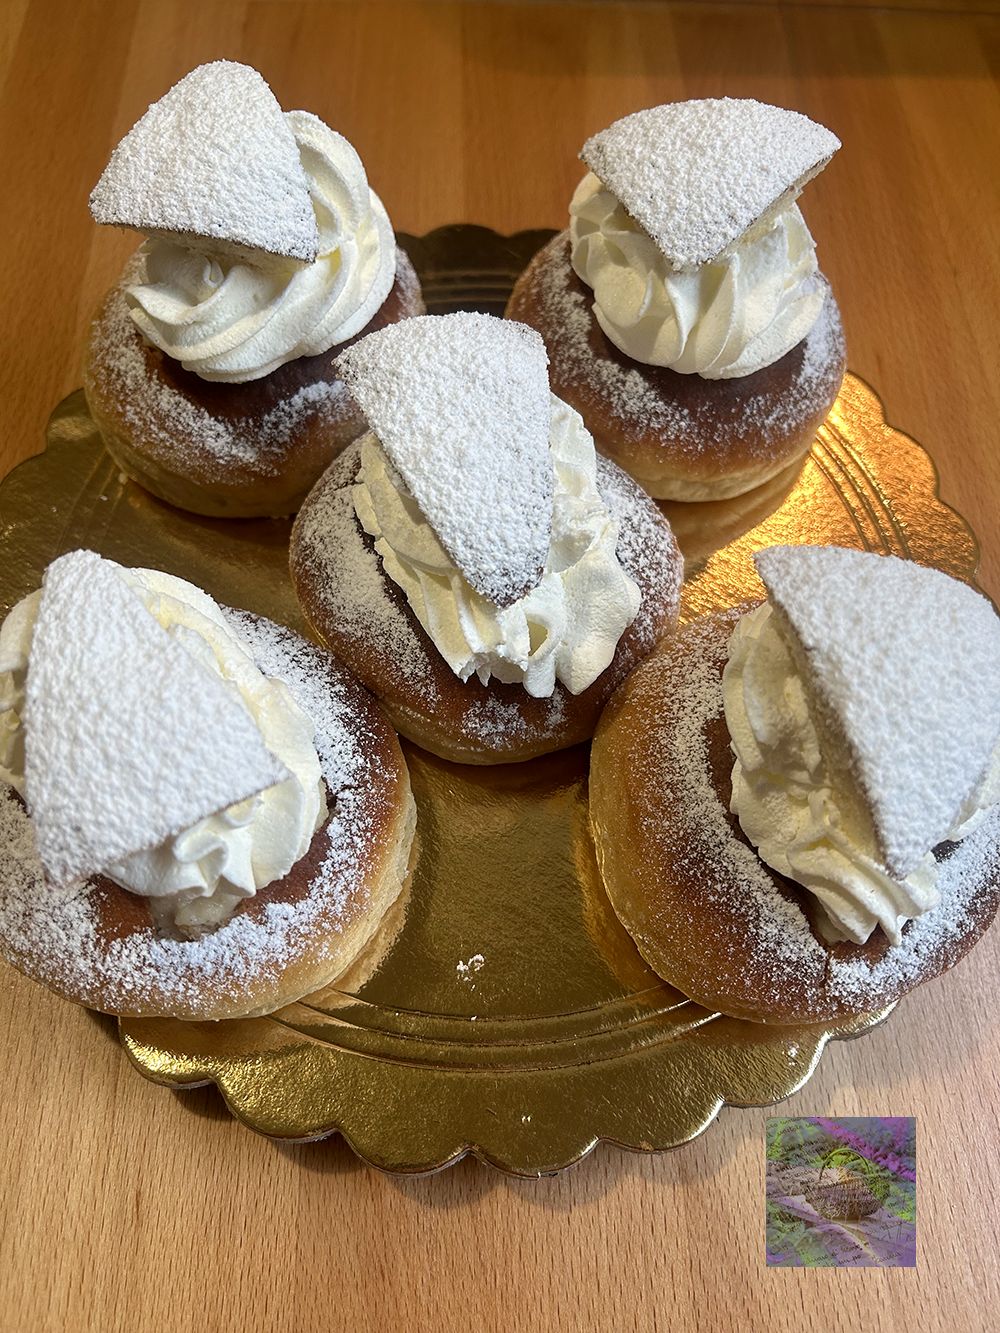 Semlor: don’t think, just do